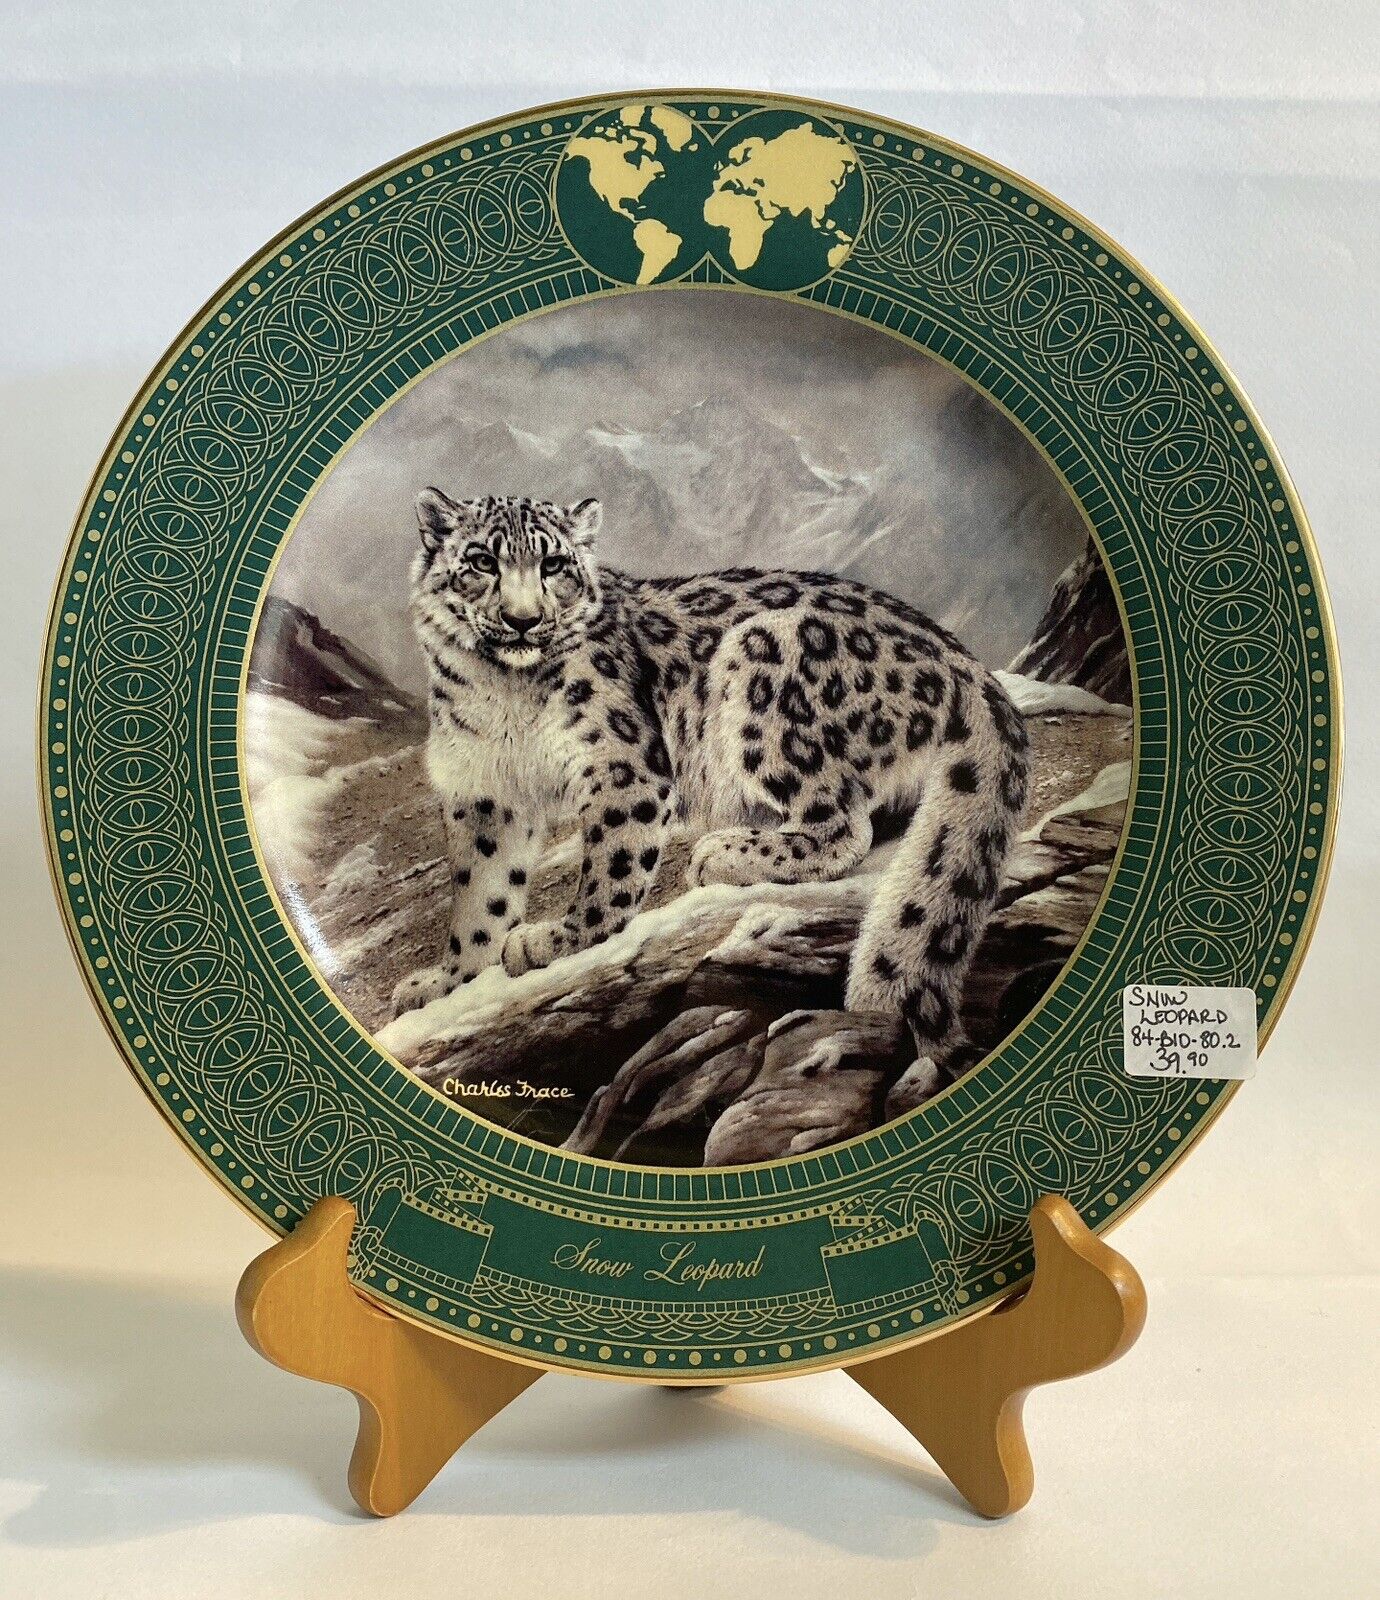 50% OFF Charles Frace\' signed “Snow Leopard” Plate 84-B10-80.2